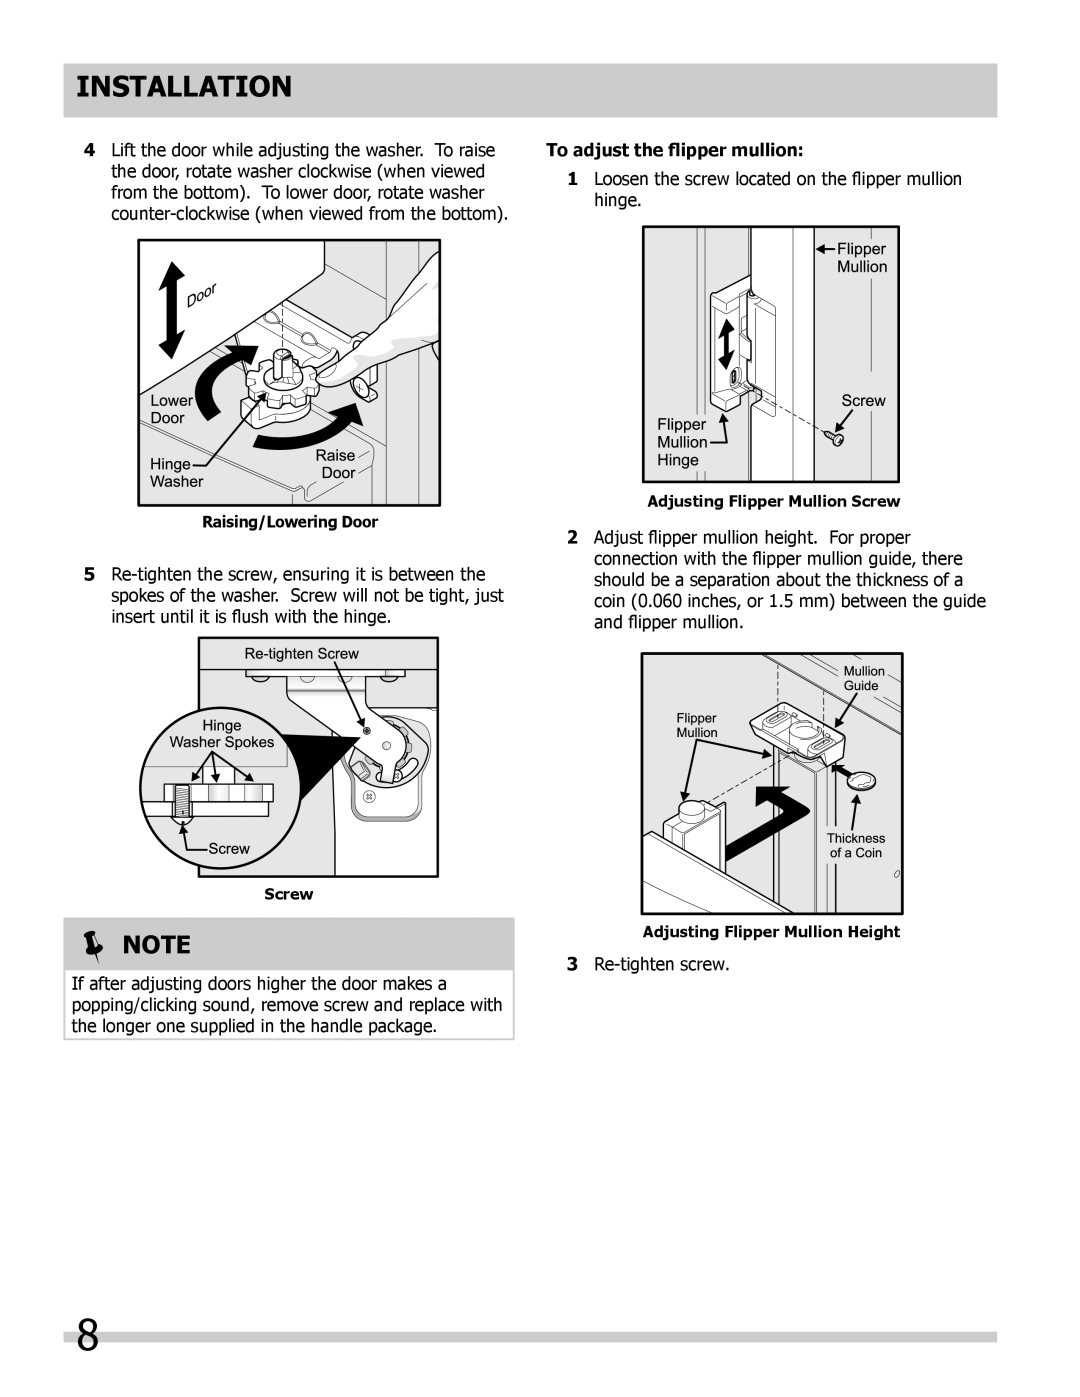 Frigidaire 242046800 important safety instructions To adjust the flipper mullion, Installation,  Note 